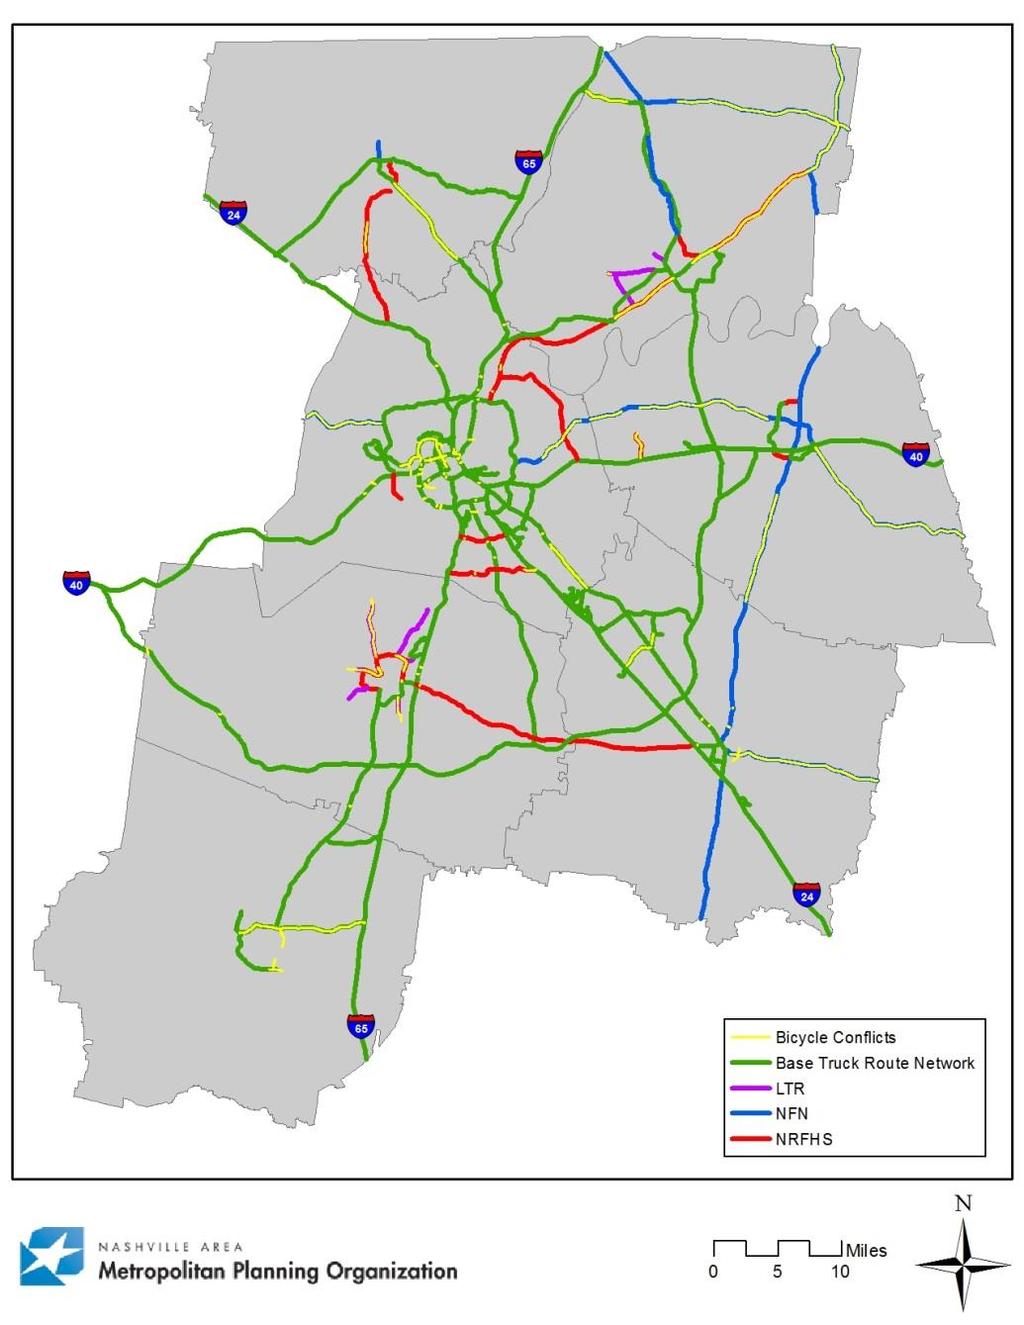 Truck Routes and Bicycle Lanes Identified segments that have overlapping truck route networks and bicycle lanes No network